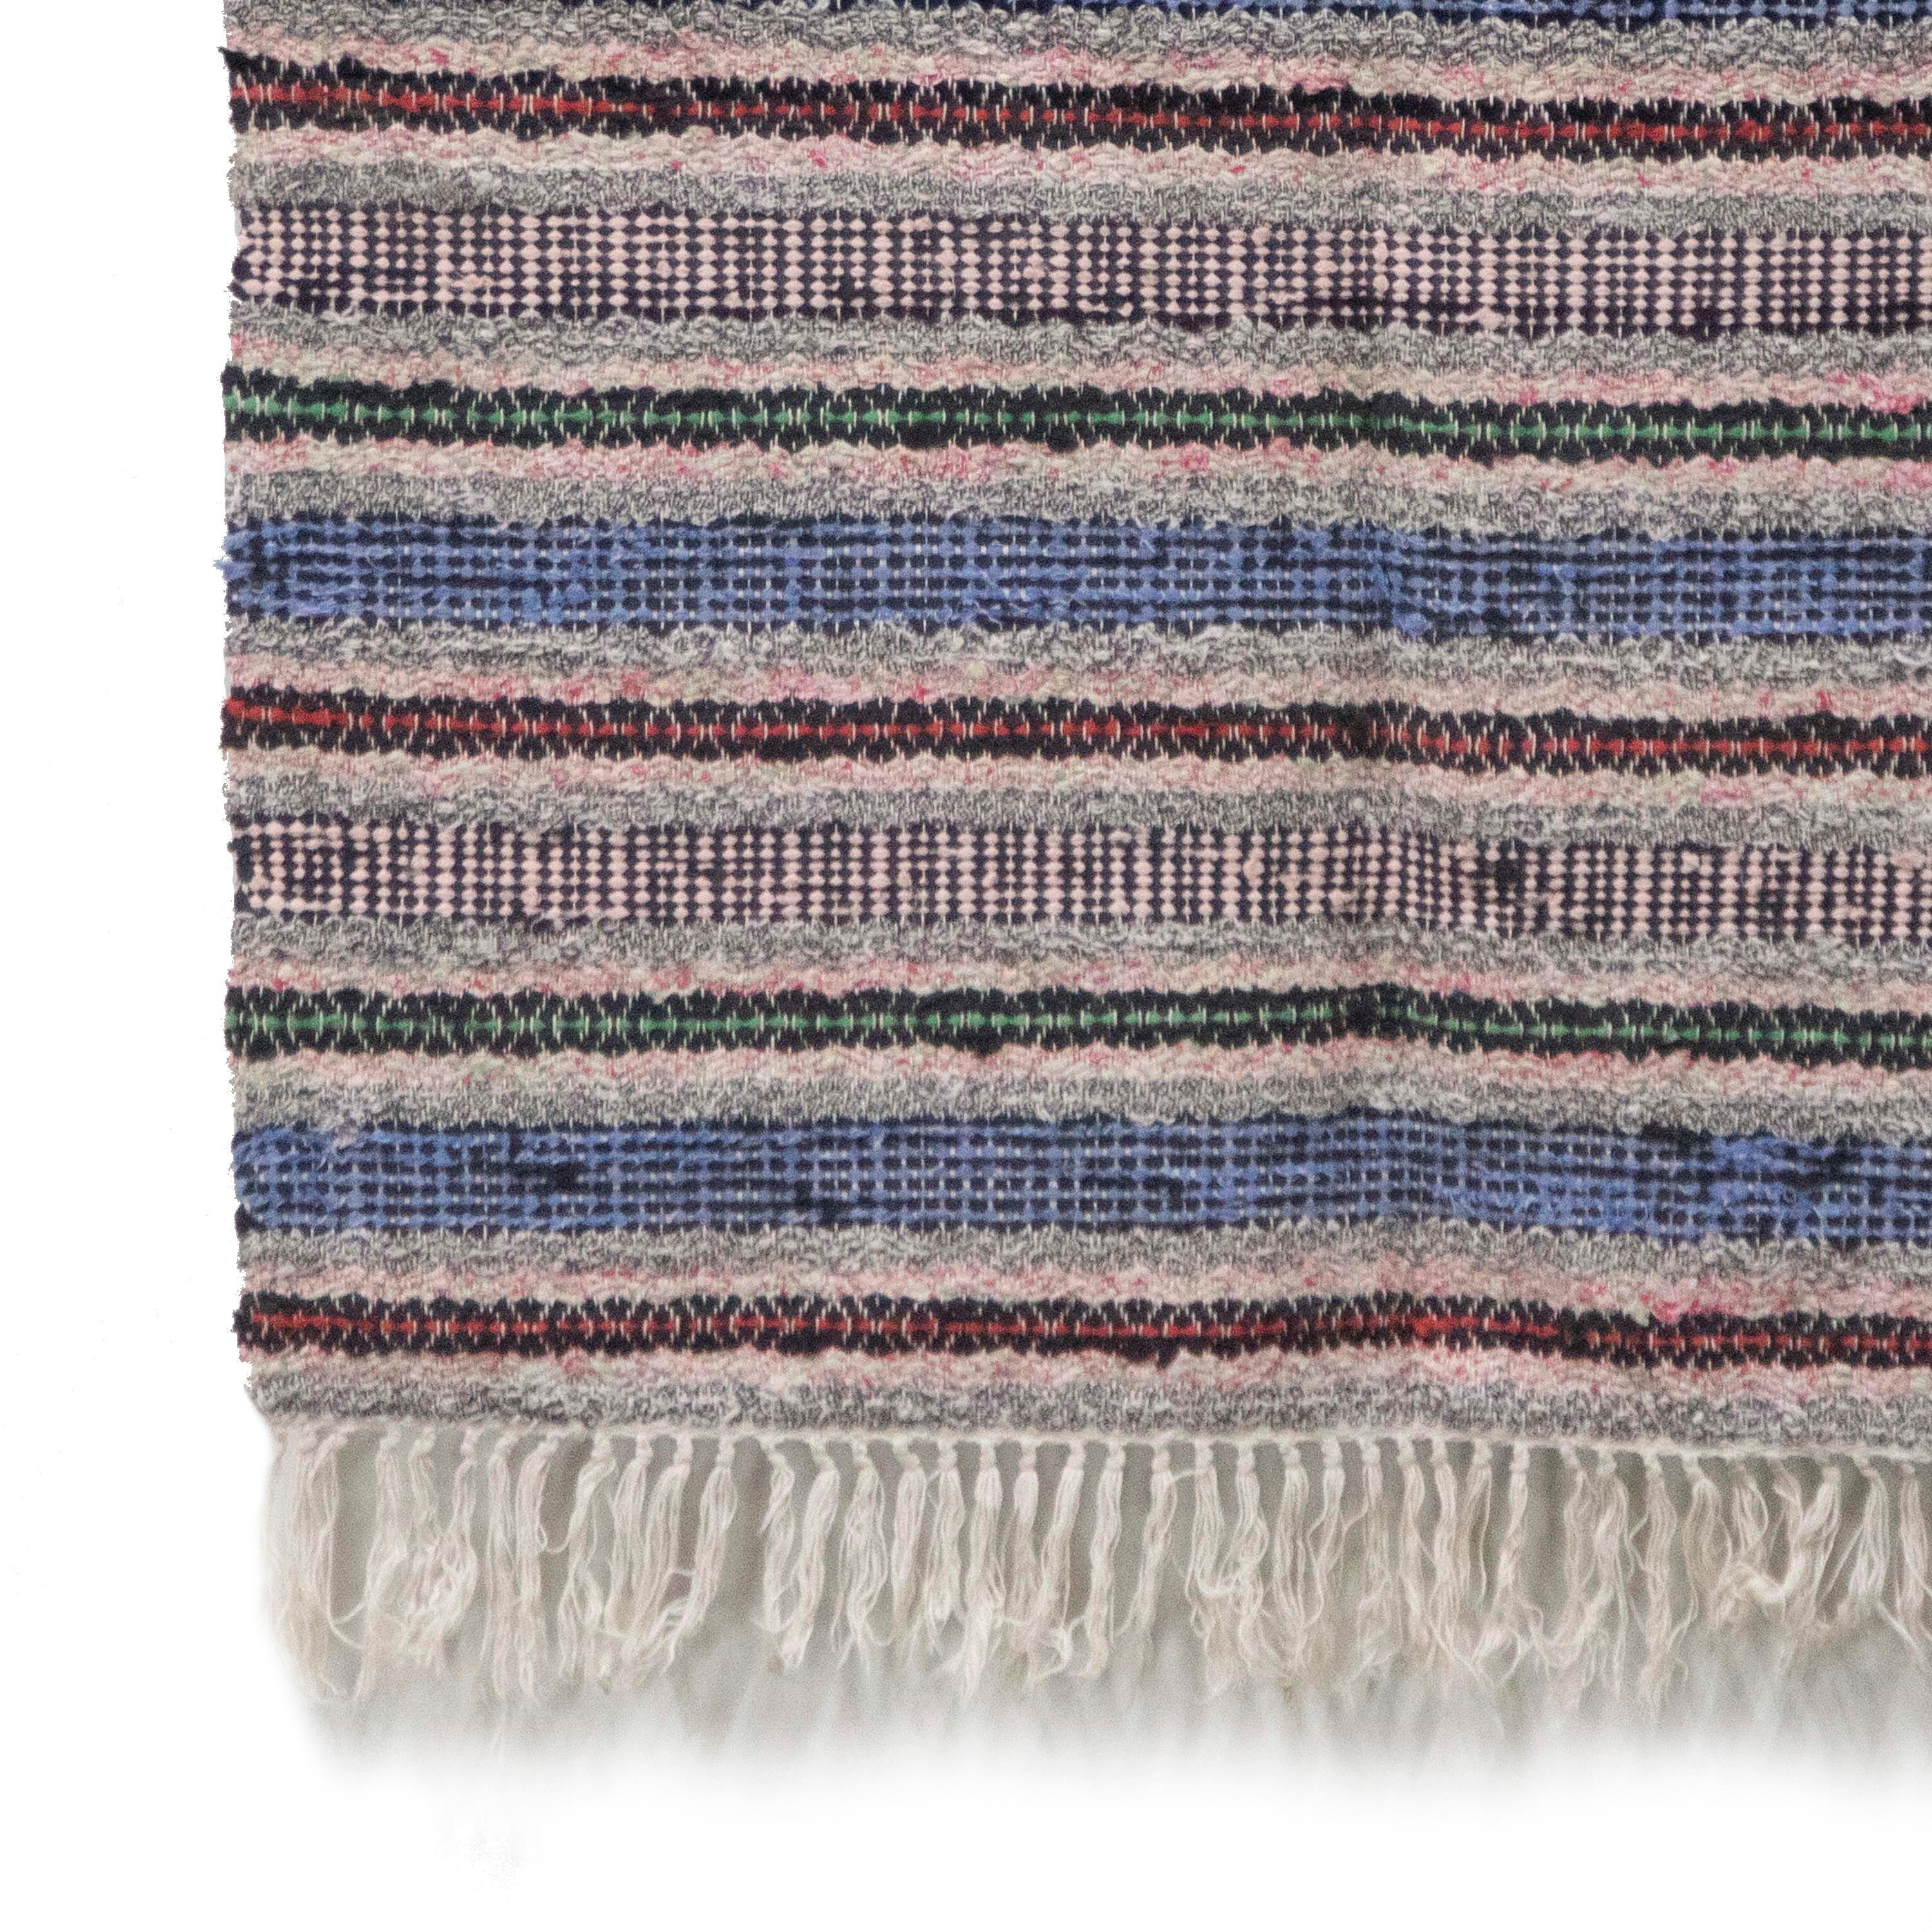 Swedish 20th Century Rag Rug In Good Condition For Sale In Tetbury, Gloucestershire